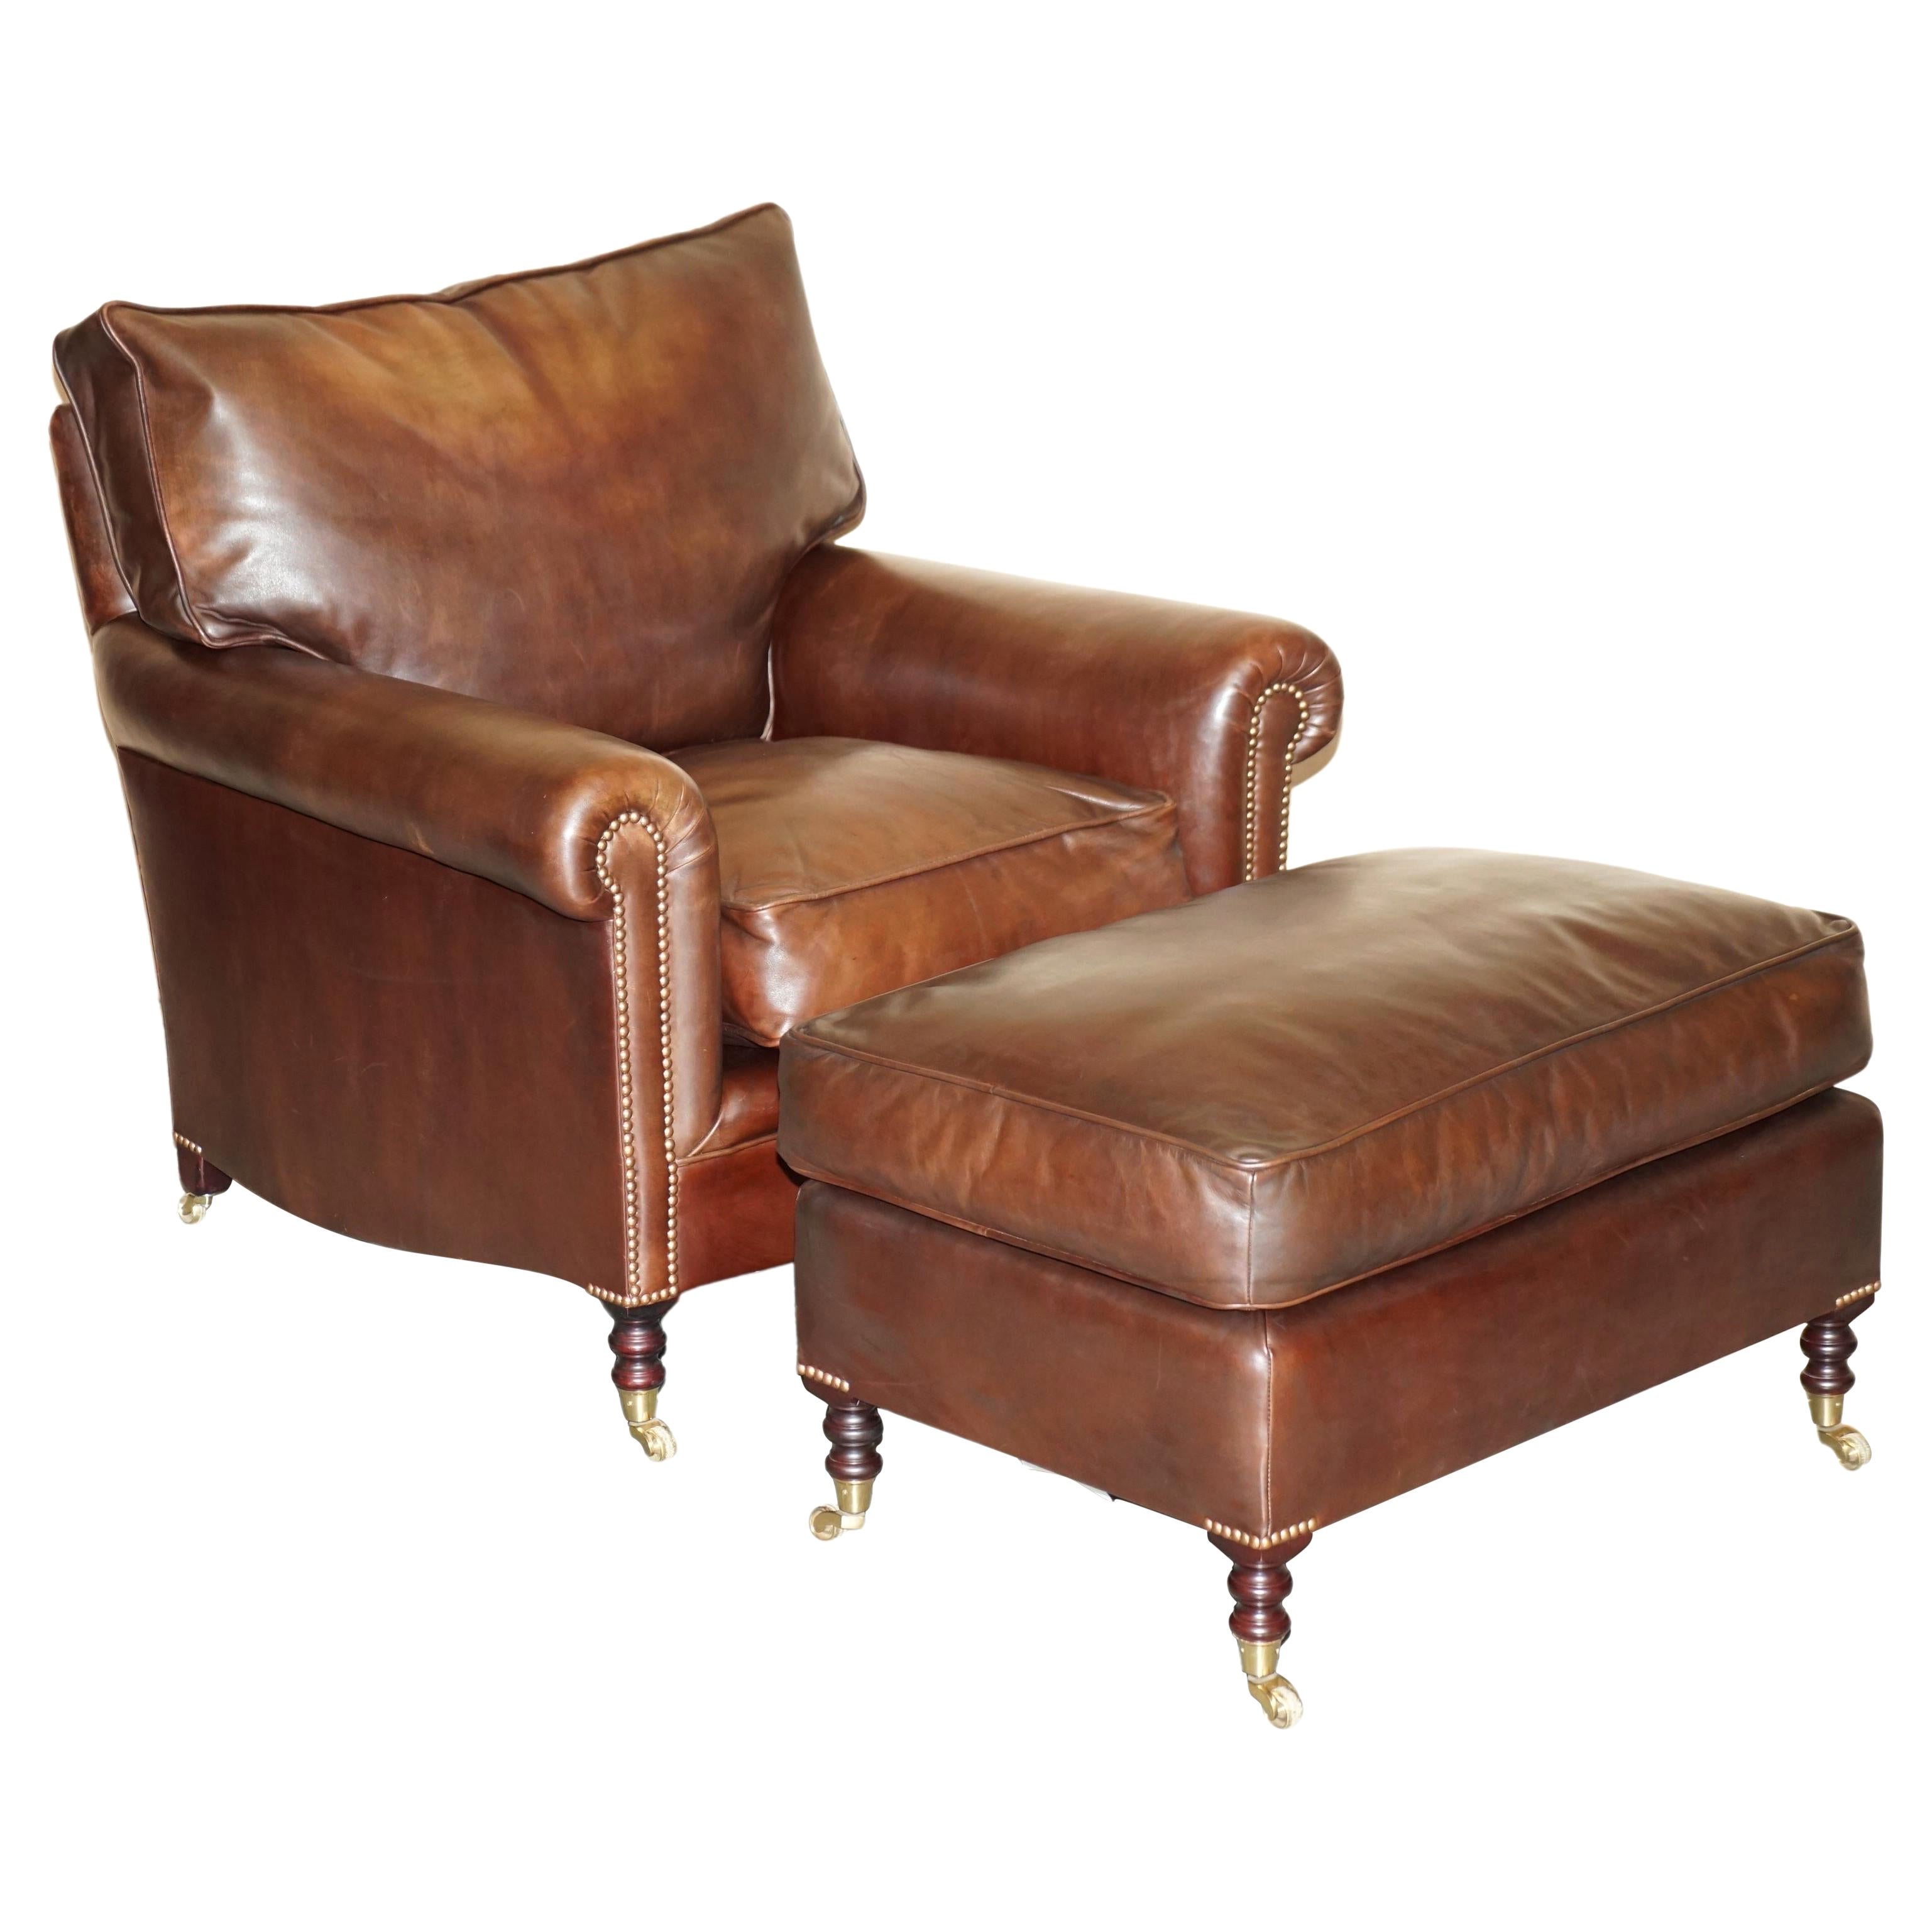 George Smith Chelsea Signature Full Scroll Arm Brown Leather Armchair & Ottoman im Angebot